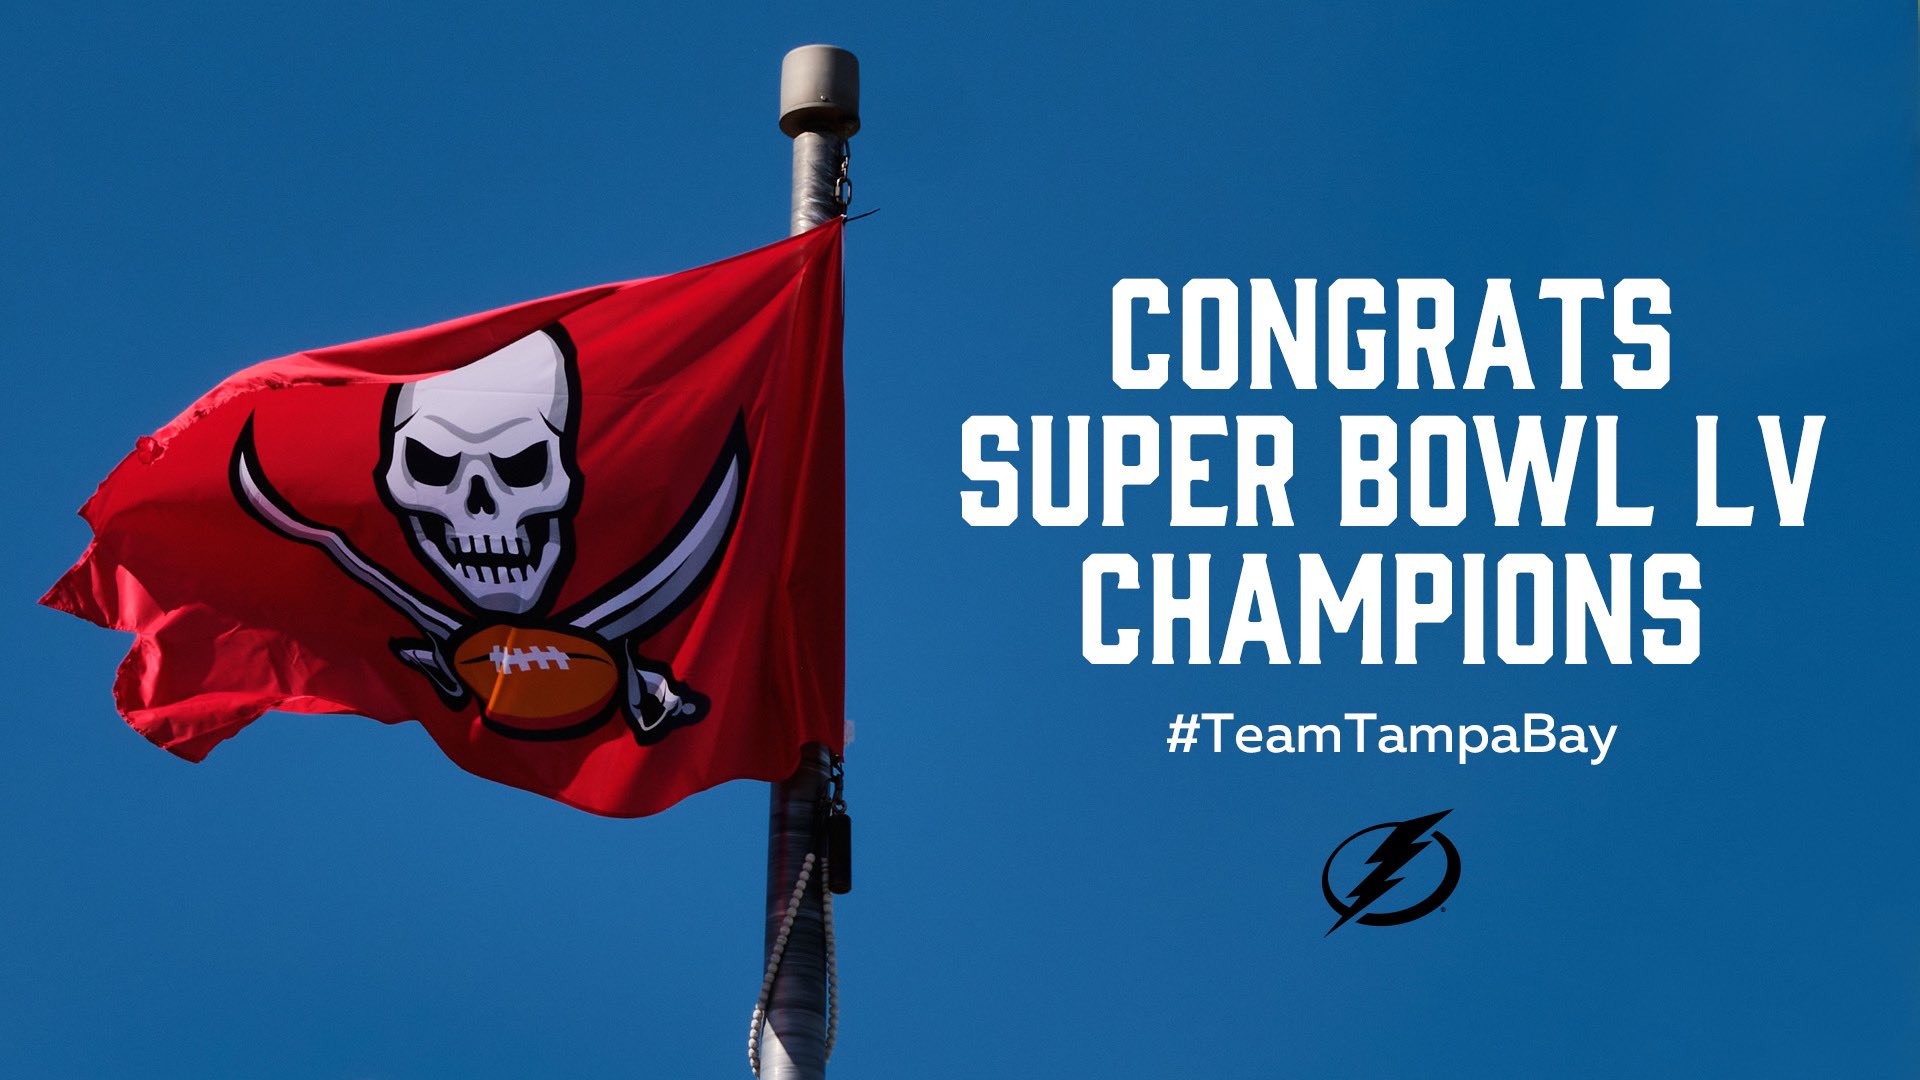 CHAMPA BAY 🏈⚡️⚾️ Bucs. Bolts. Rays. It's a good day in Tampa